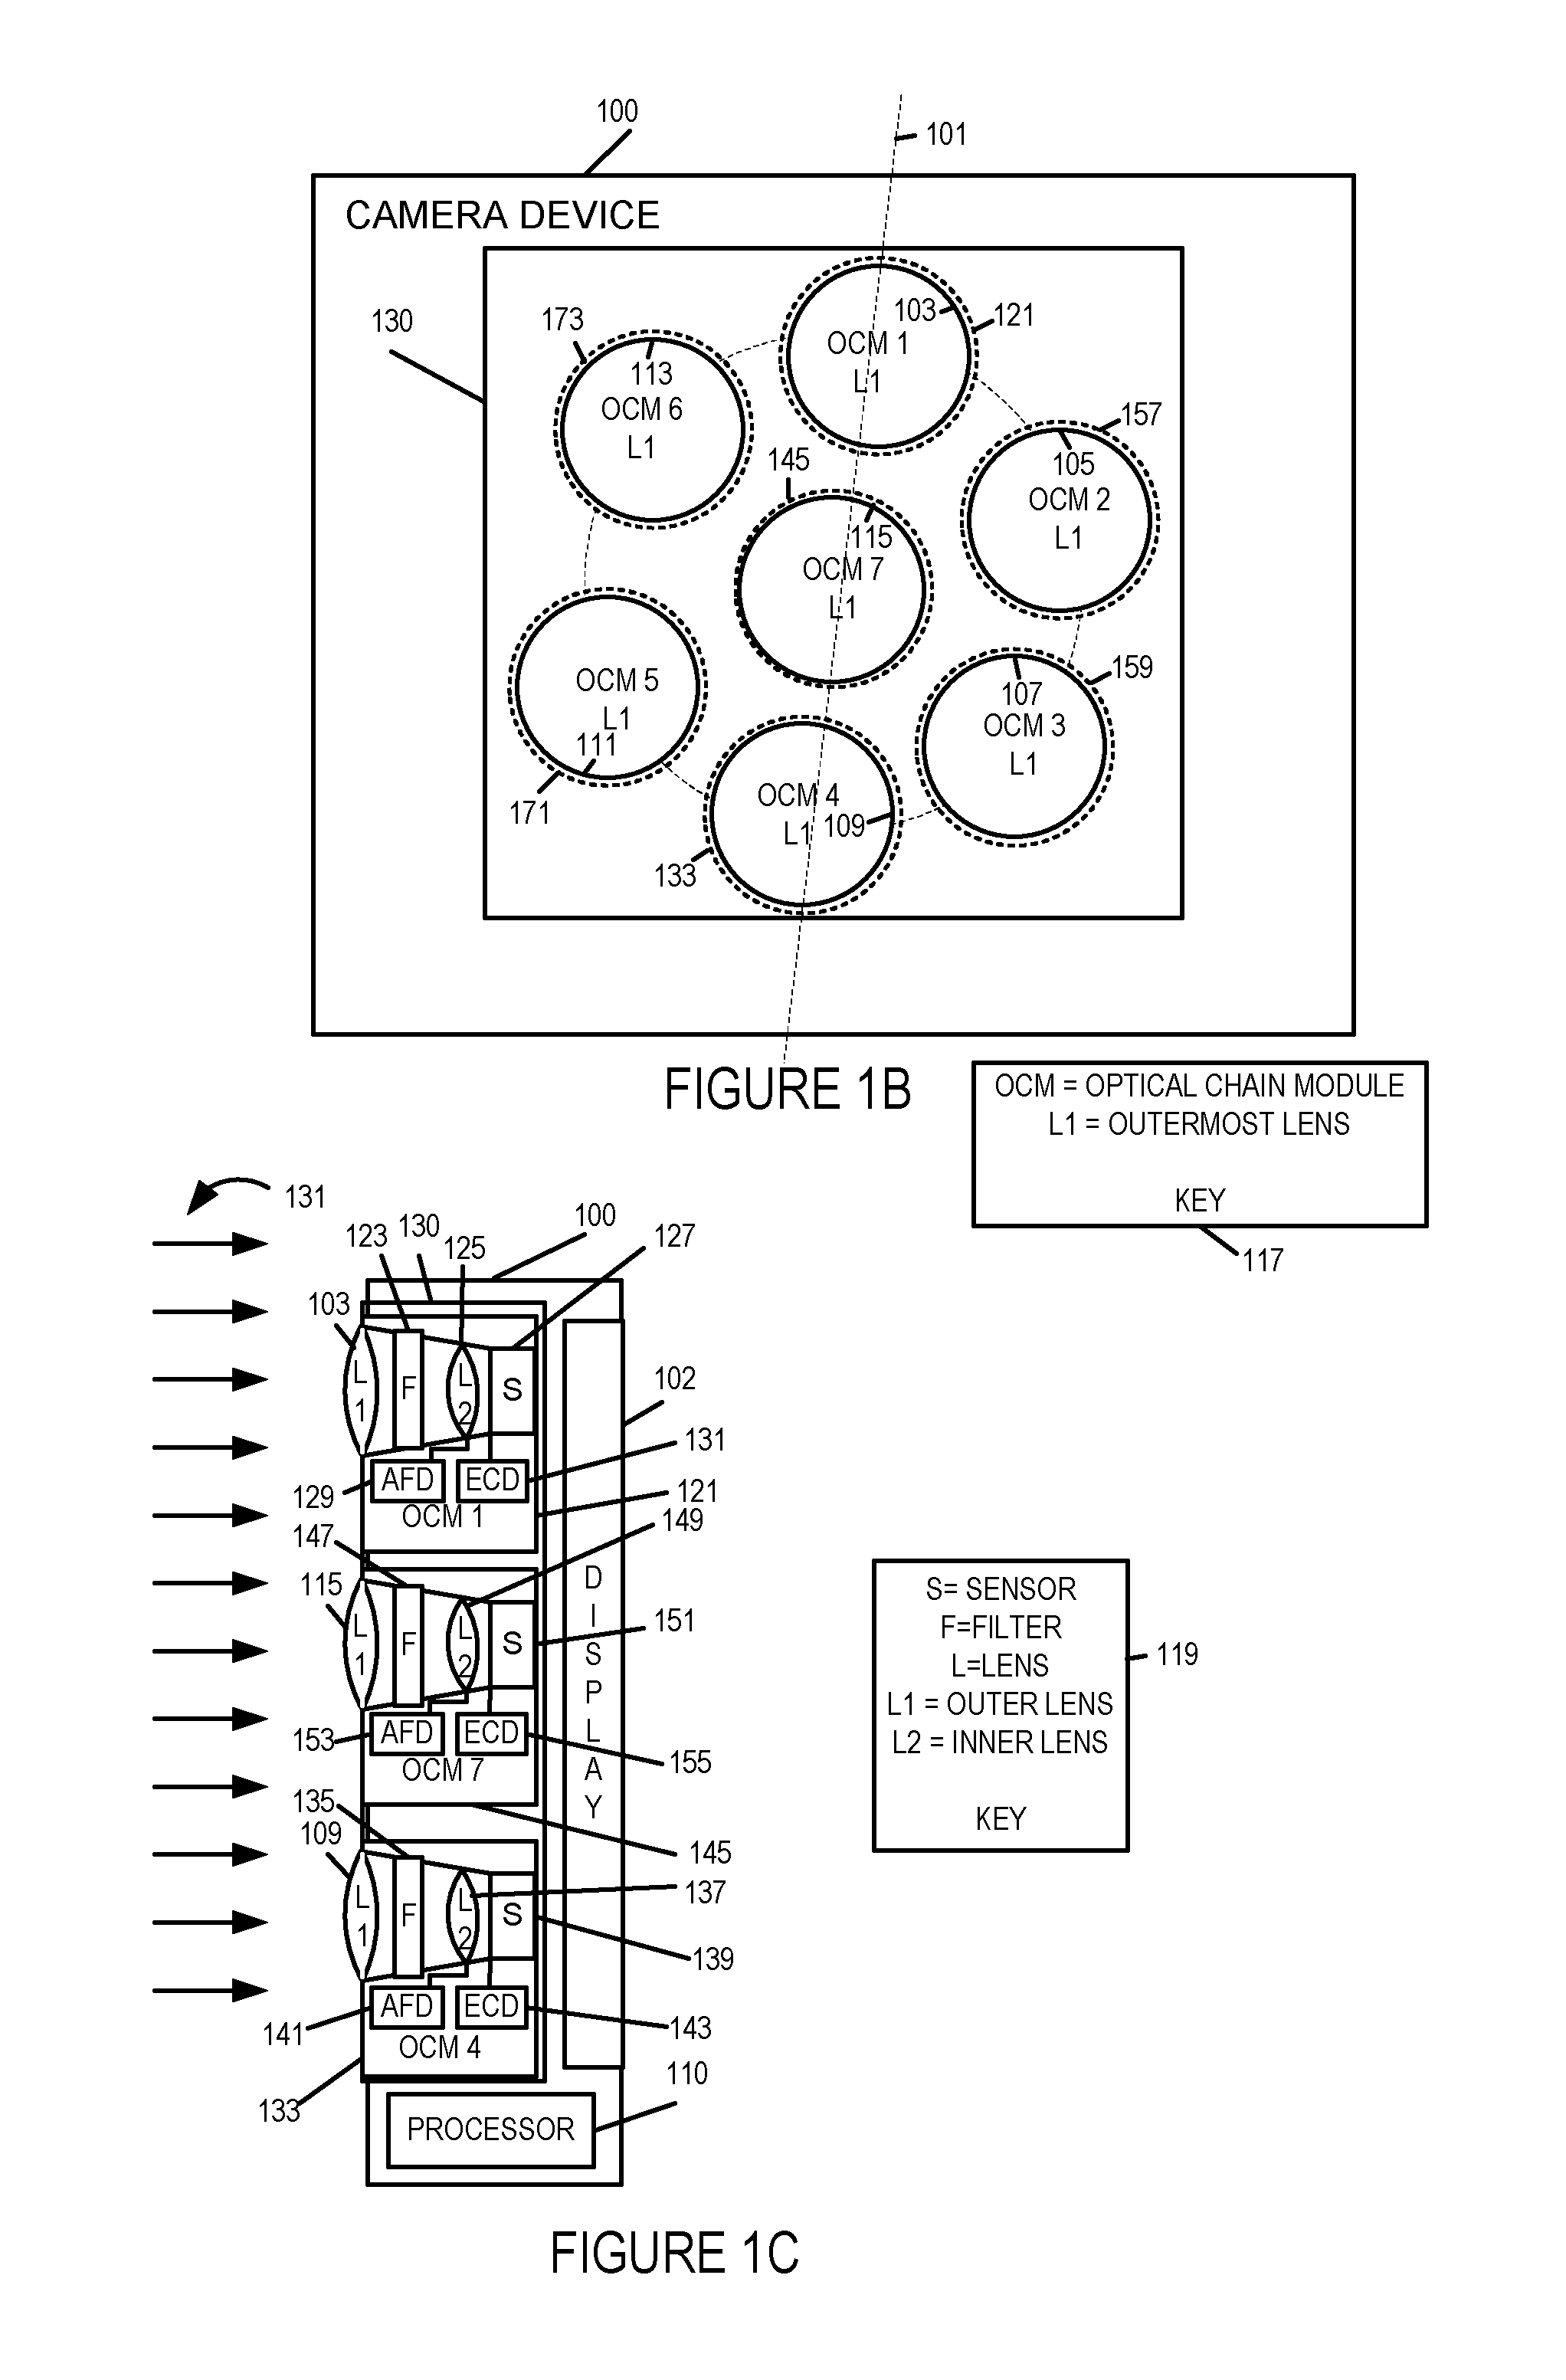 Methods and apparatus for capturing and/or processing images